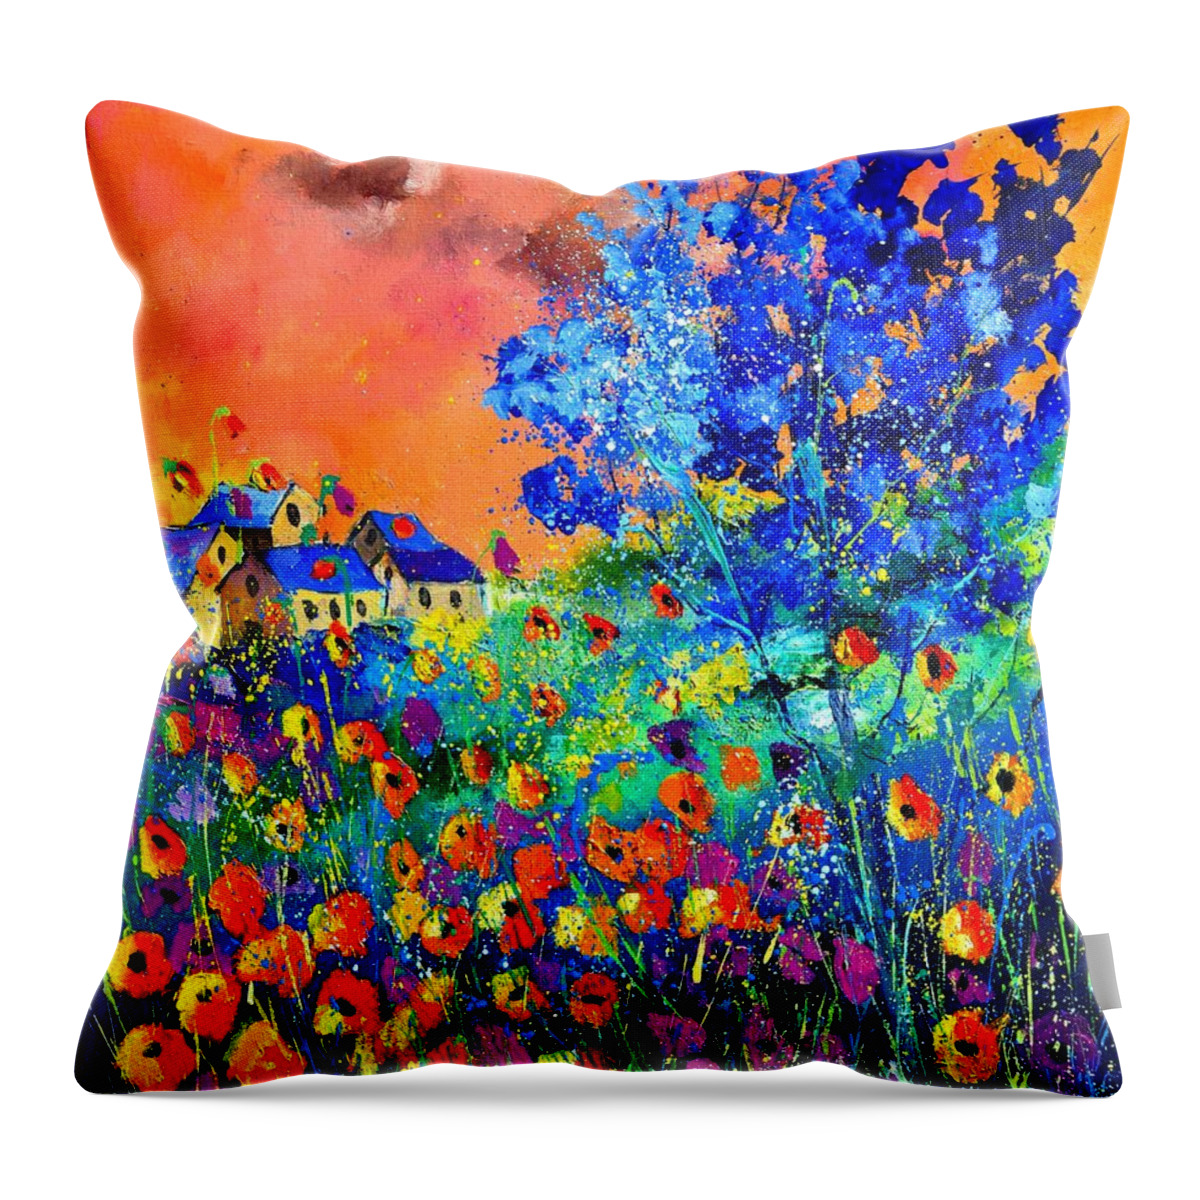 Landscape Throw Pillow featuring the painting Summer 674160 by Pol Ledent